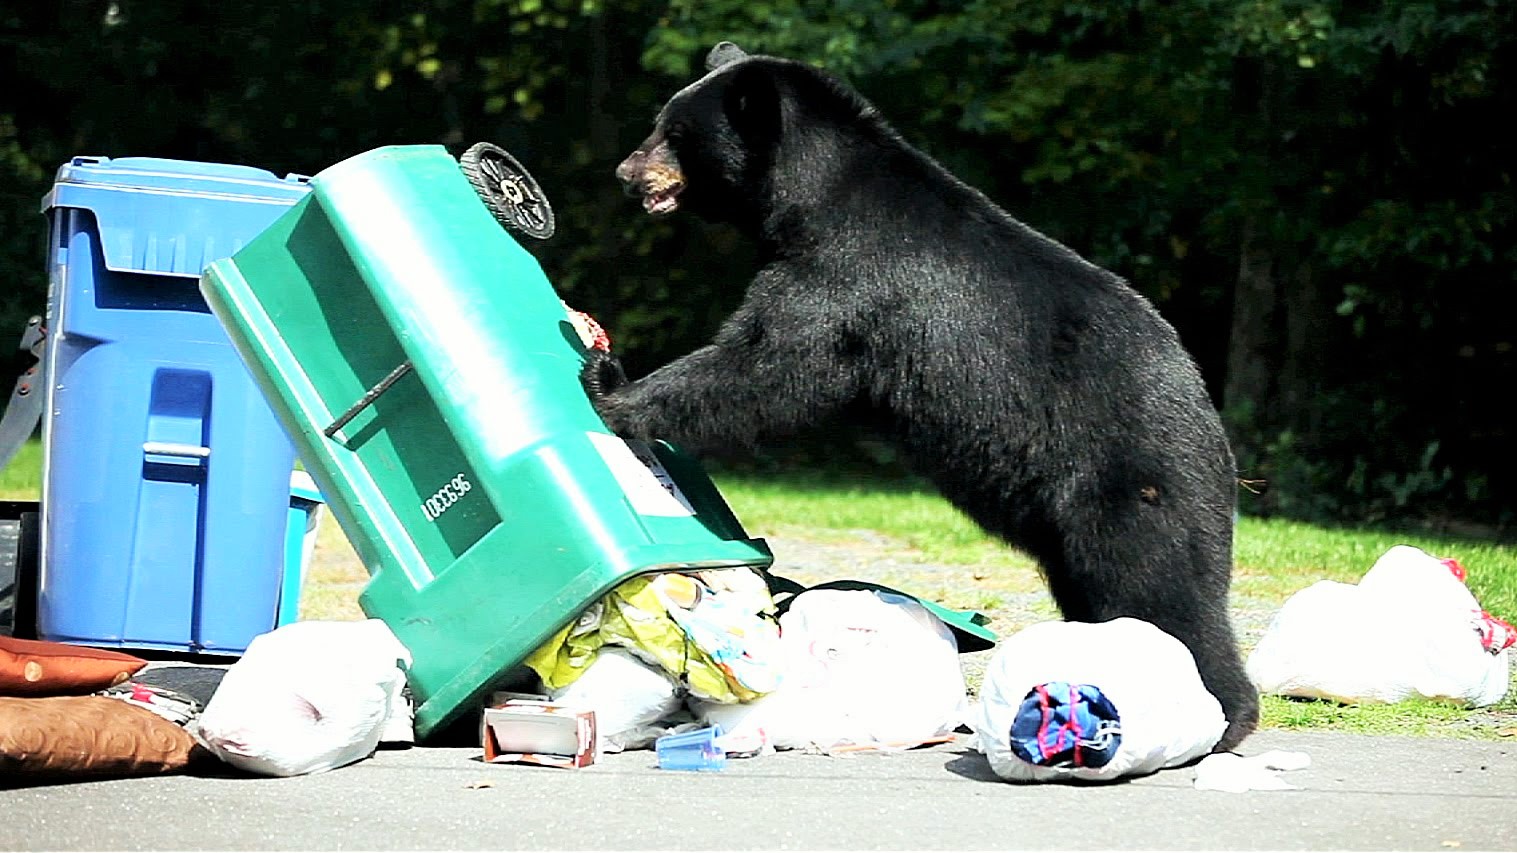 Bear-Resistant Waste Management Is Important